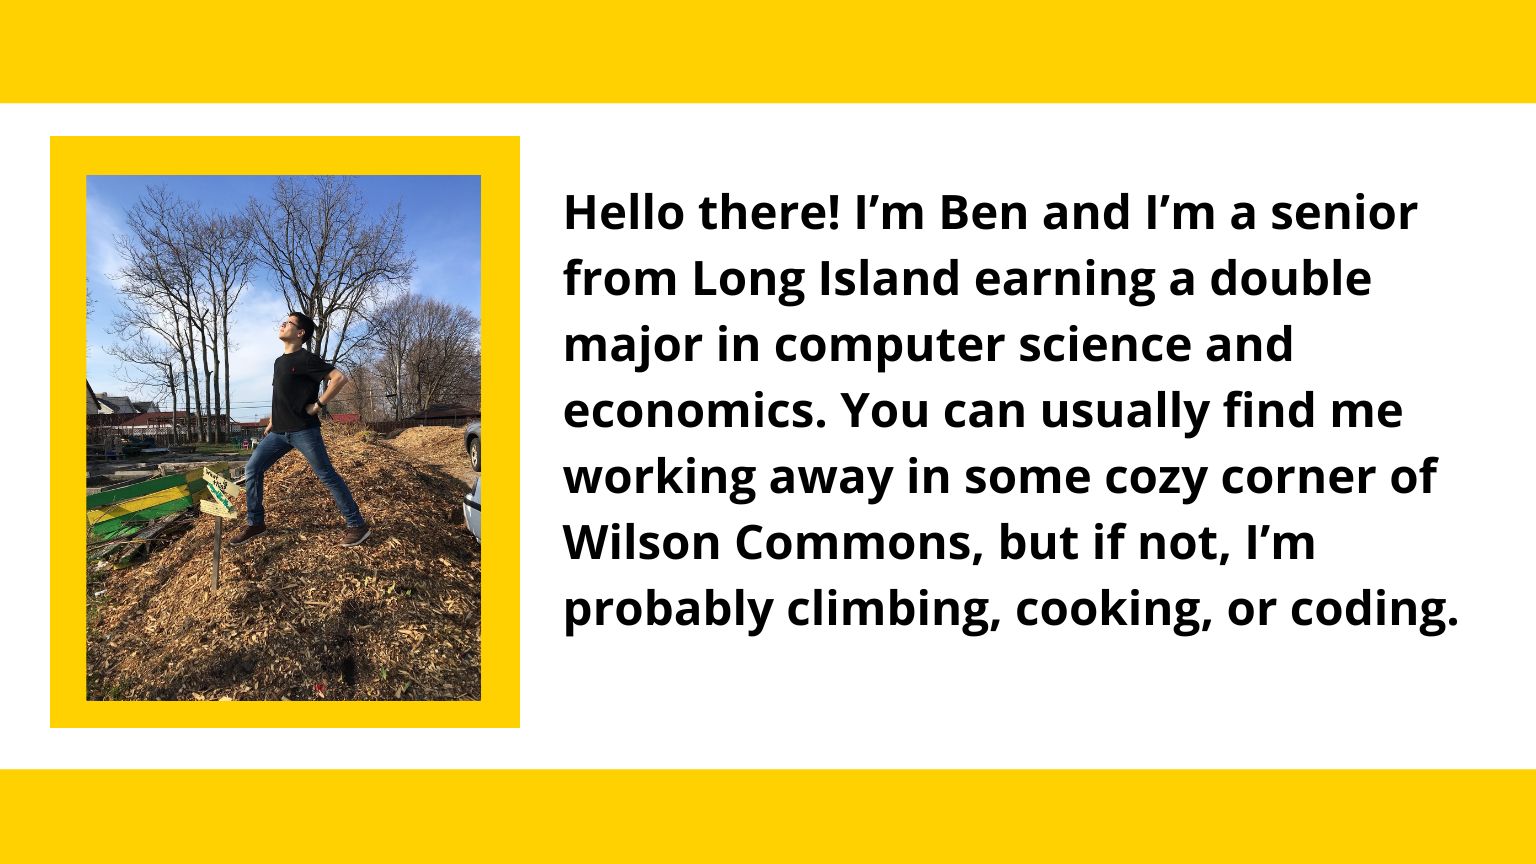  A photo of Ben that reads: Hello there! I’m Ben and I’m a senior from Long Island earning a double major in computer science and economics. You can usually find me working away in some cozy corner of Wilson Commons, but if not, I’m probably climbing, cooking, or coding.